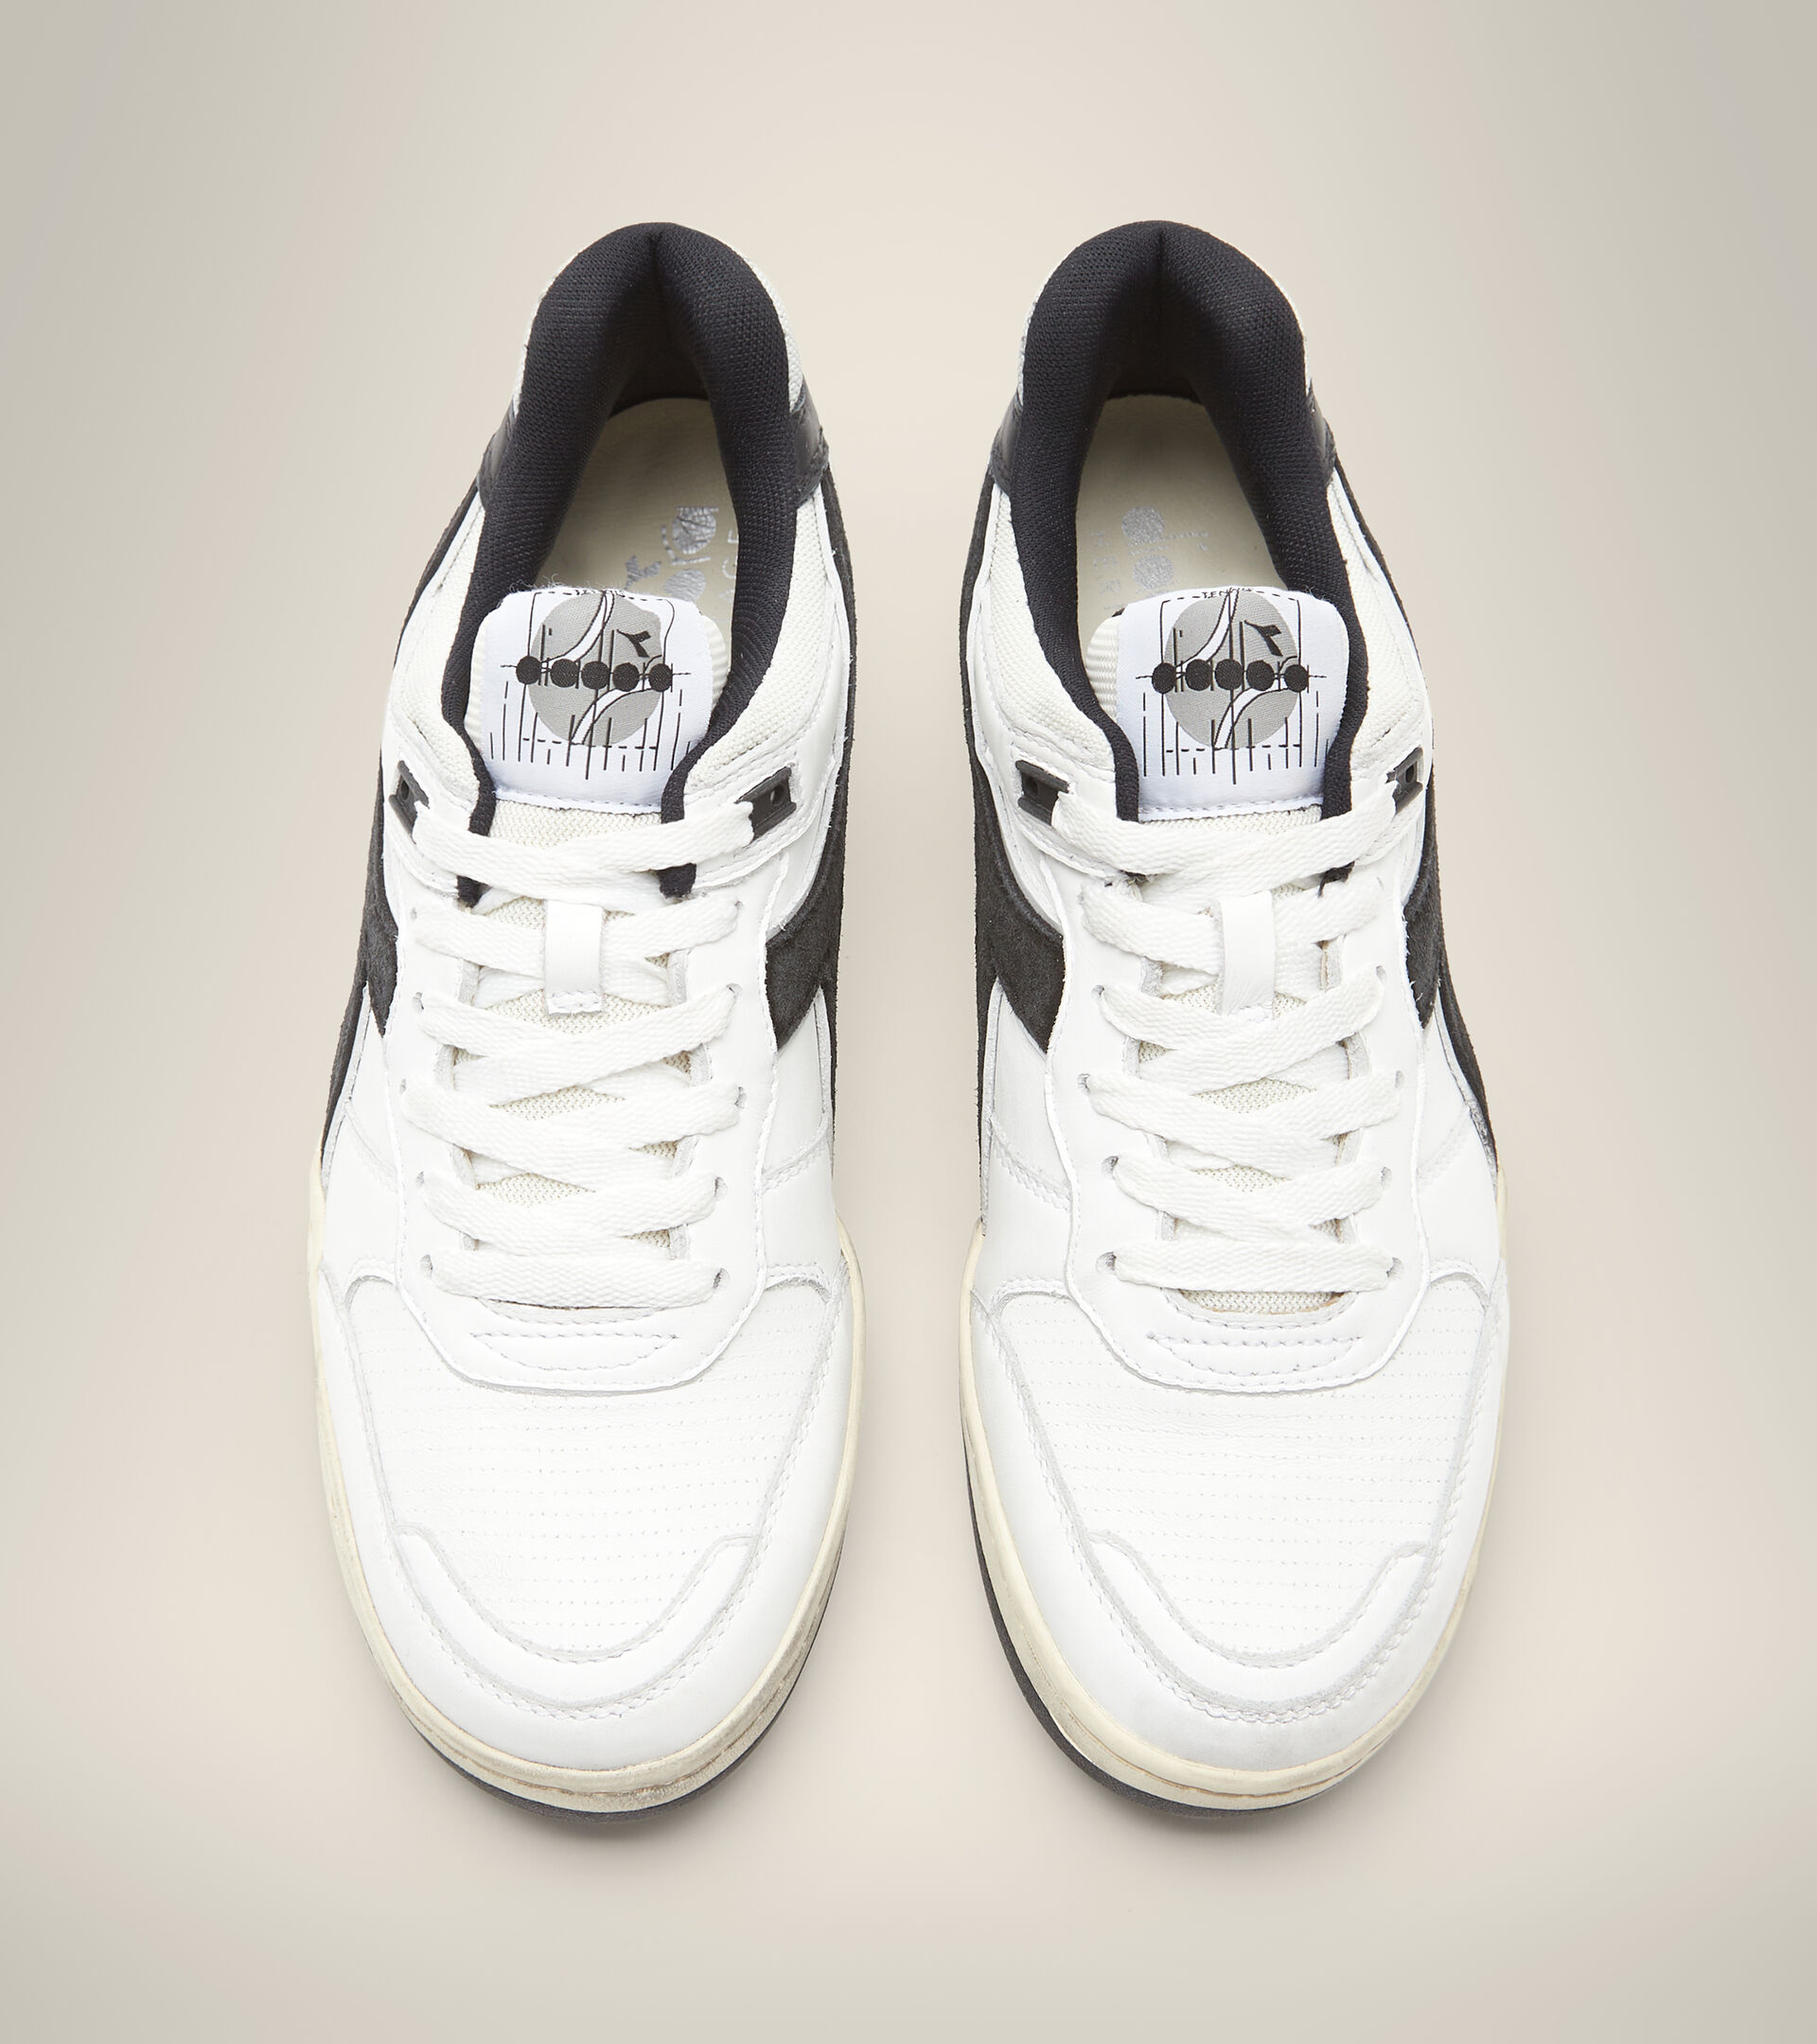 Chaussures Heritage Made in Italy - Unisexe B.560 USED ITALIA WEISS/SCHWARZ - Diadora